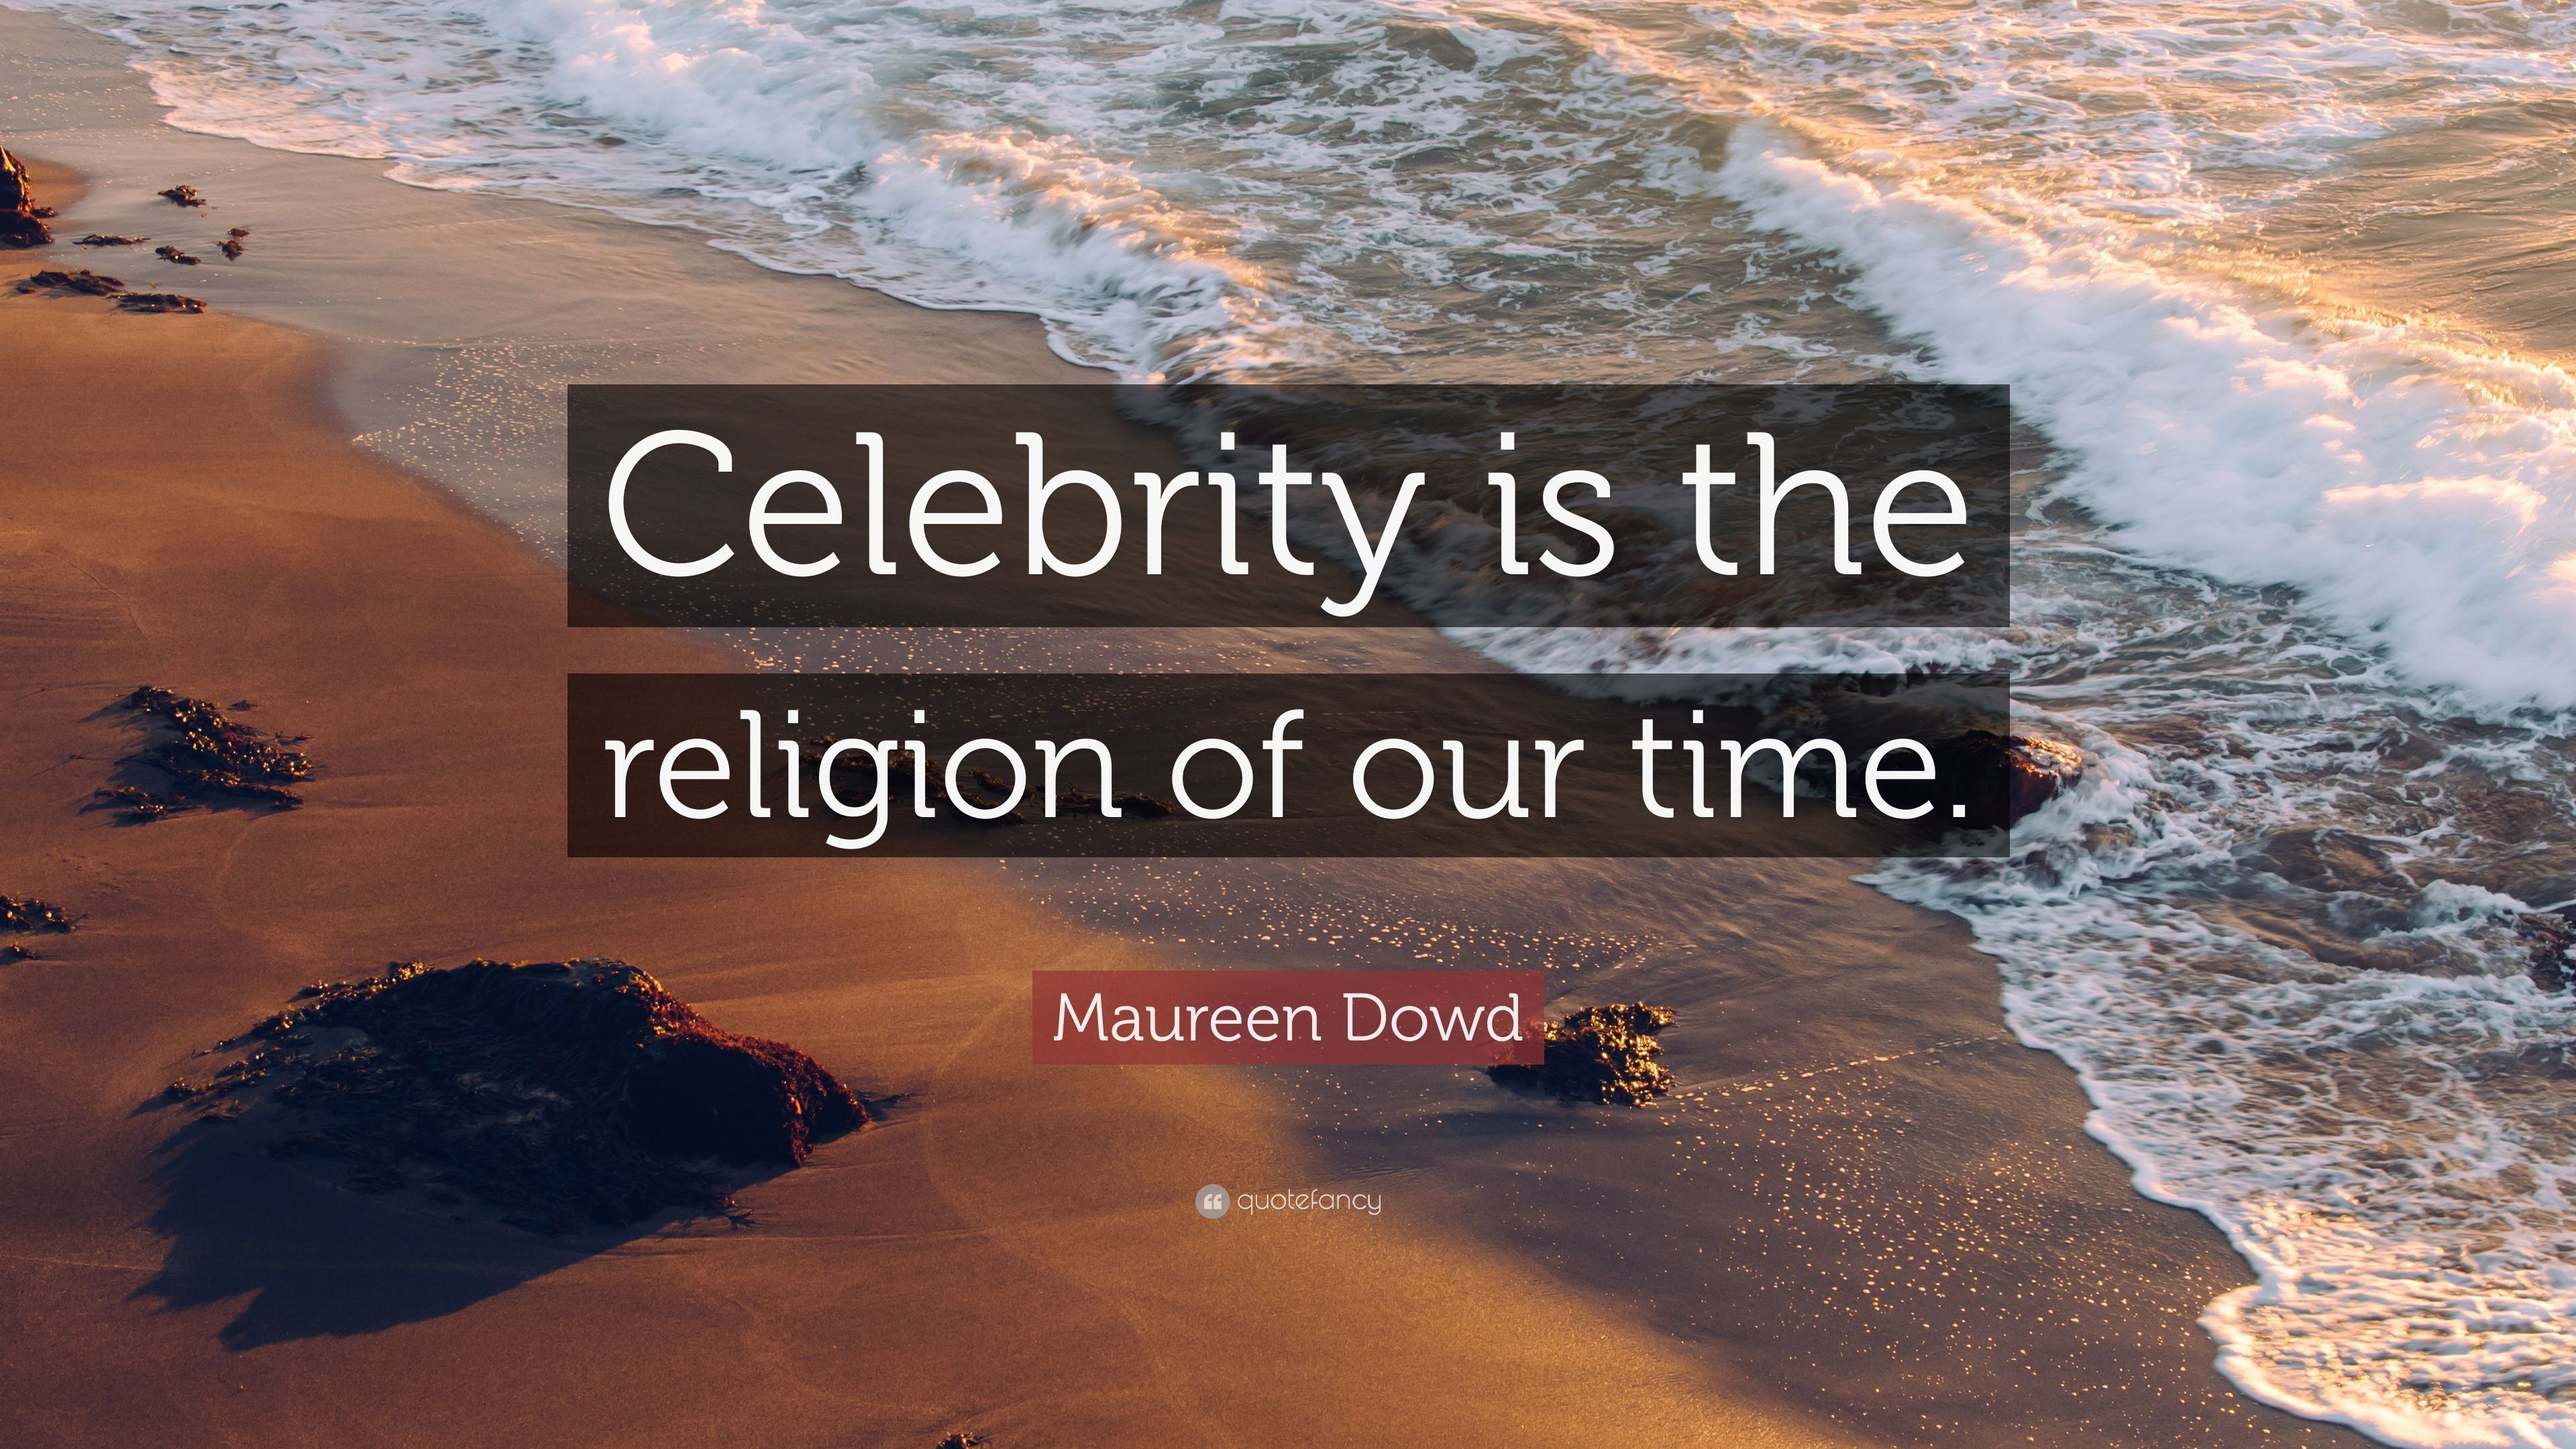 Maureen Dowd Quote: “Celebrity is the religion of our time.” 7